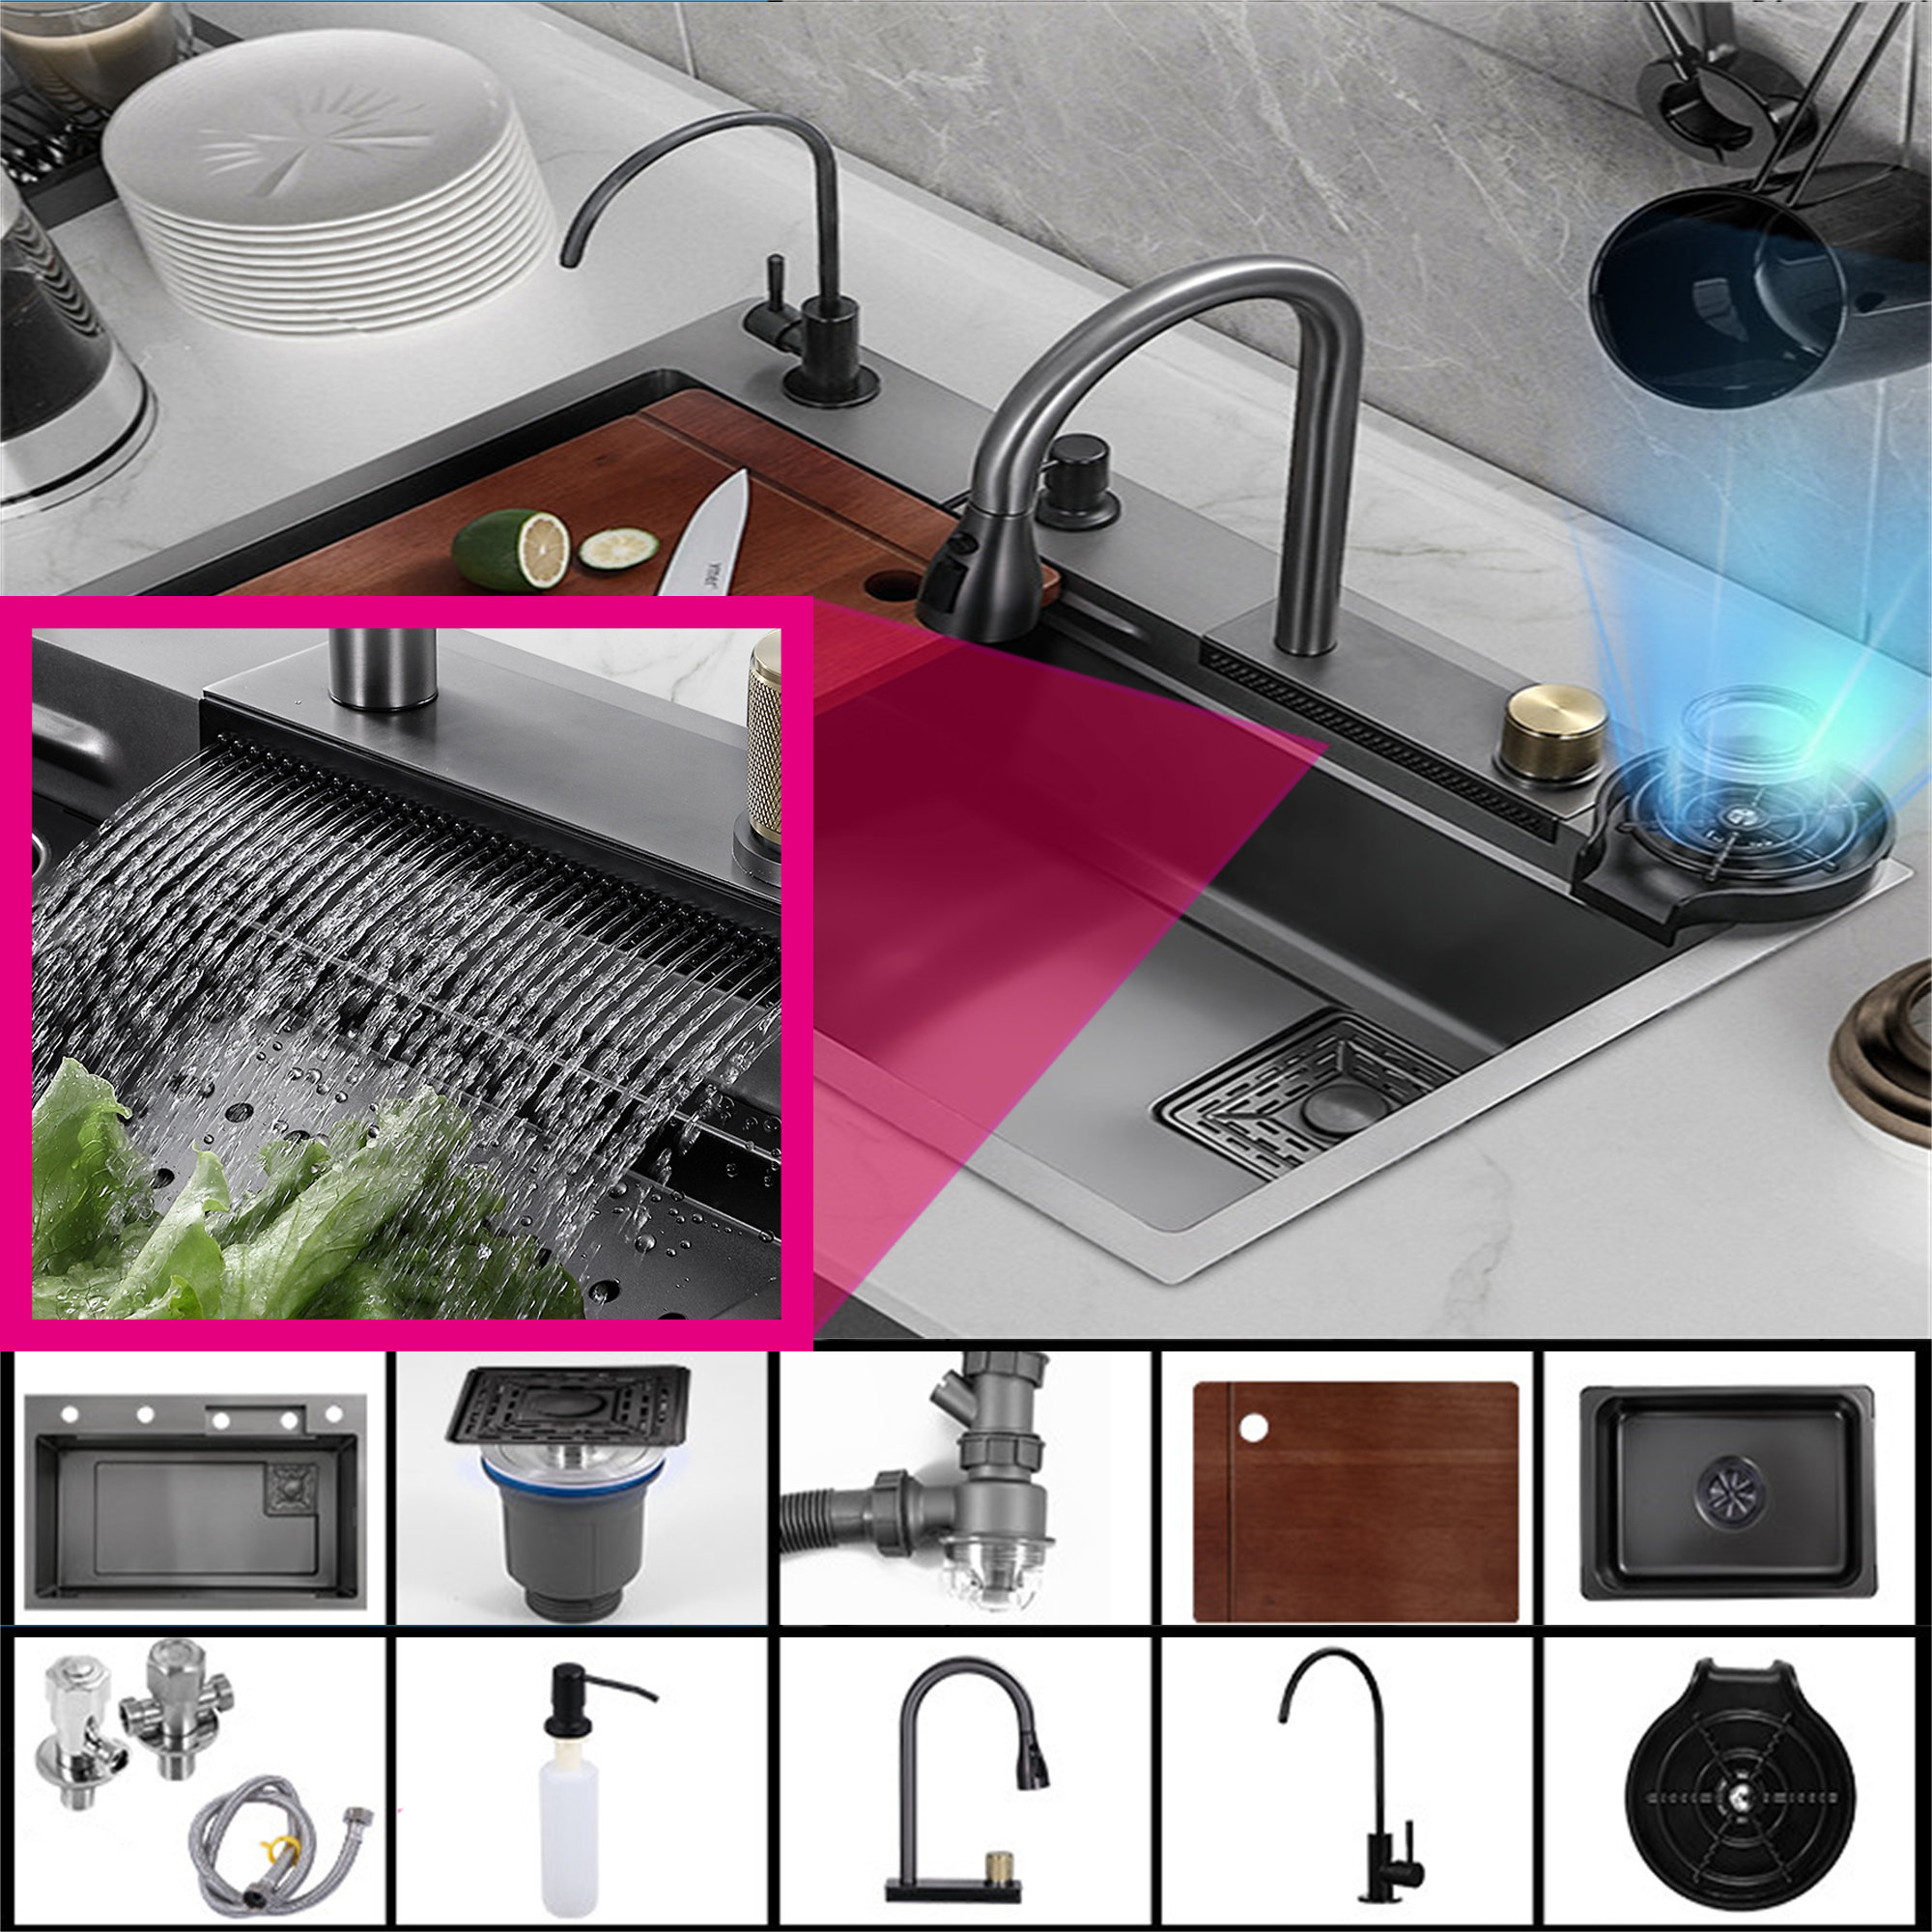 Pehohe ‎SINK168BD75 31.5 L x 18.1 W Drop-In Kitchen Sink with Faucet Size: 7.9 H x 29.5 W x 19.1 D